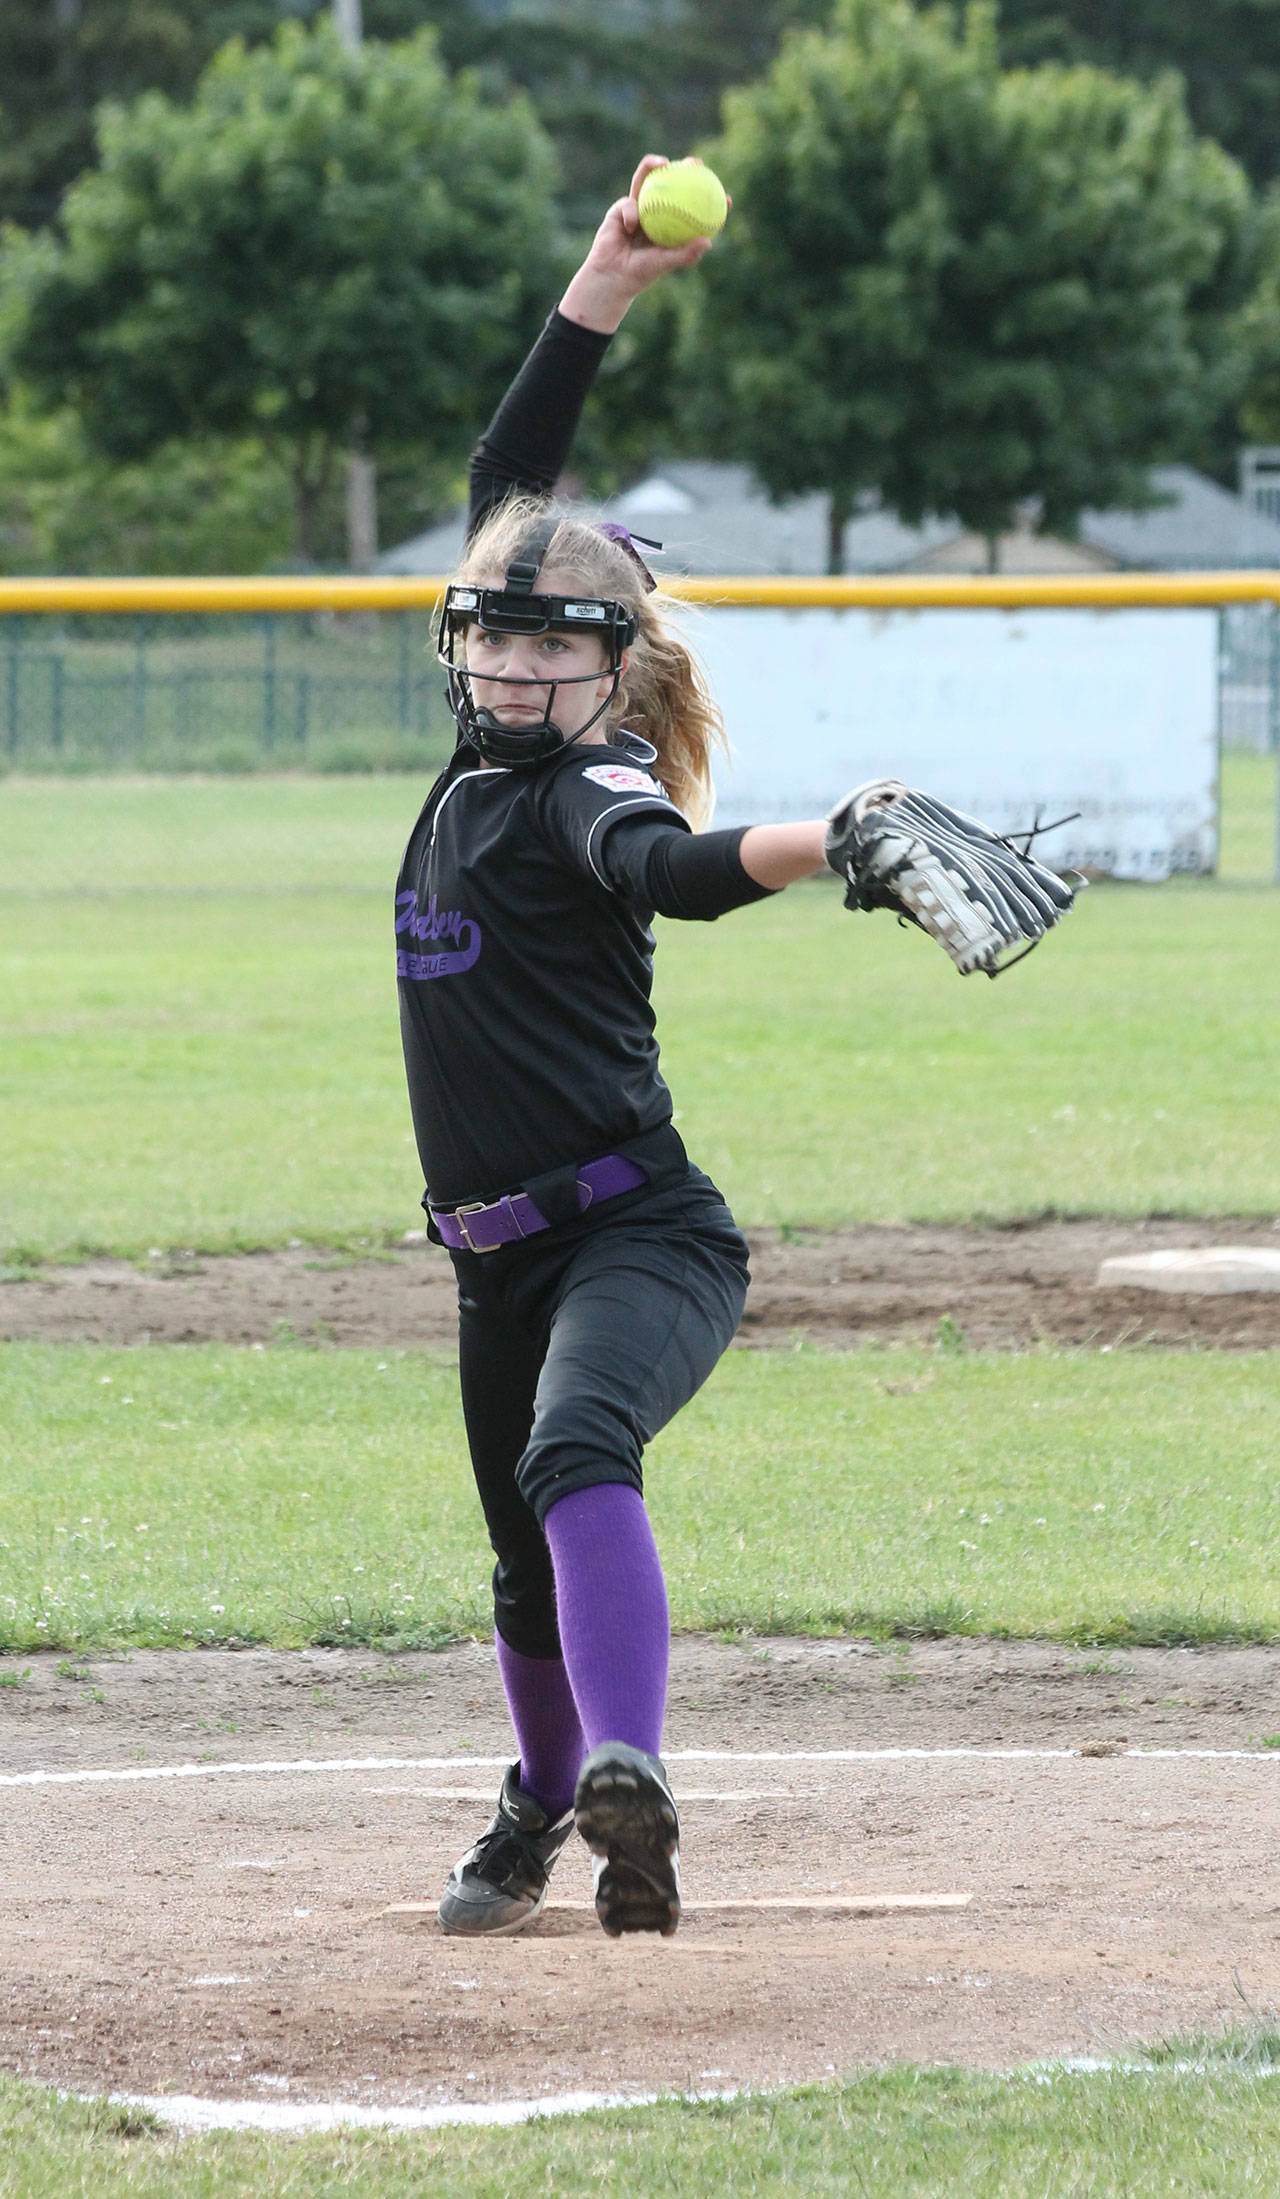 The Bat Busters’ Reese Wasinger hurls a pitch in her 15-strikeout win over the Blue Dragons Wednesday. (Photo by Jim Waller/Whidbey News-Times)